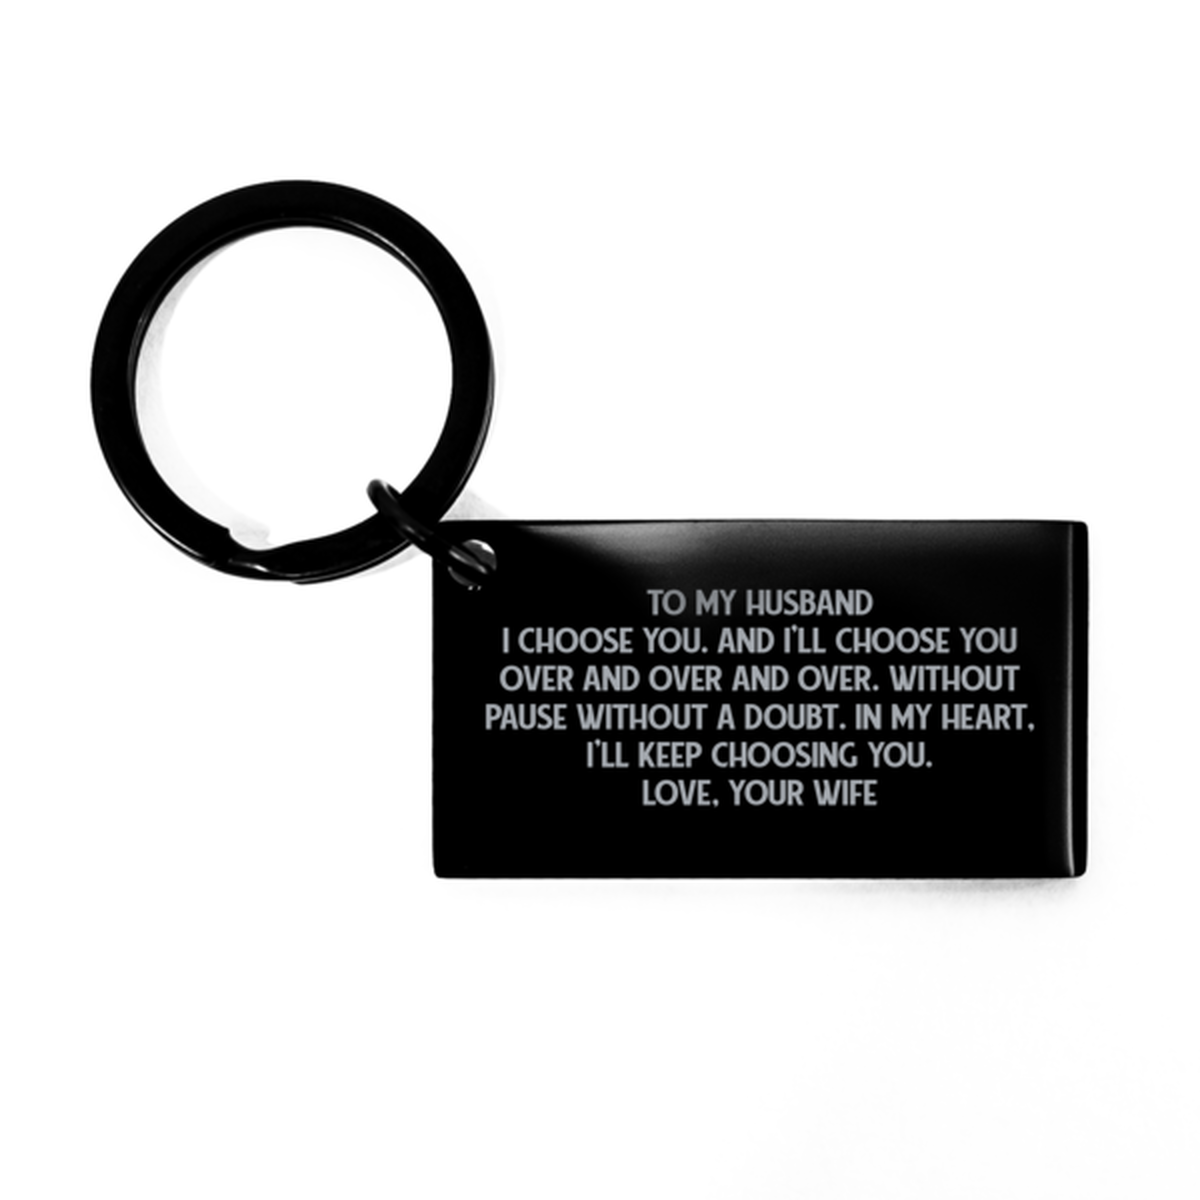 To My Husband Black Keychain, I'll Keep Choosing You, Anniversary Gifts For Husband From Wife, Birthday Gifts For Men